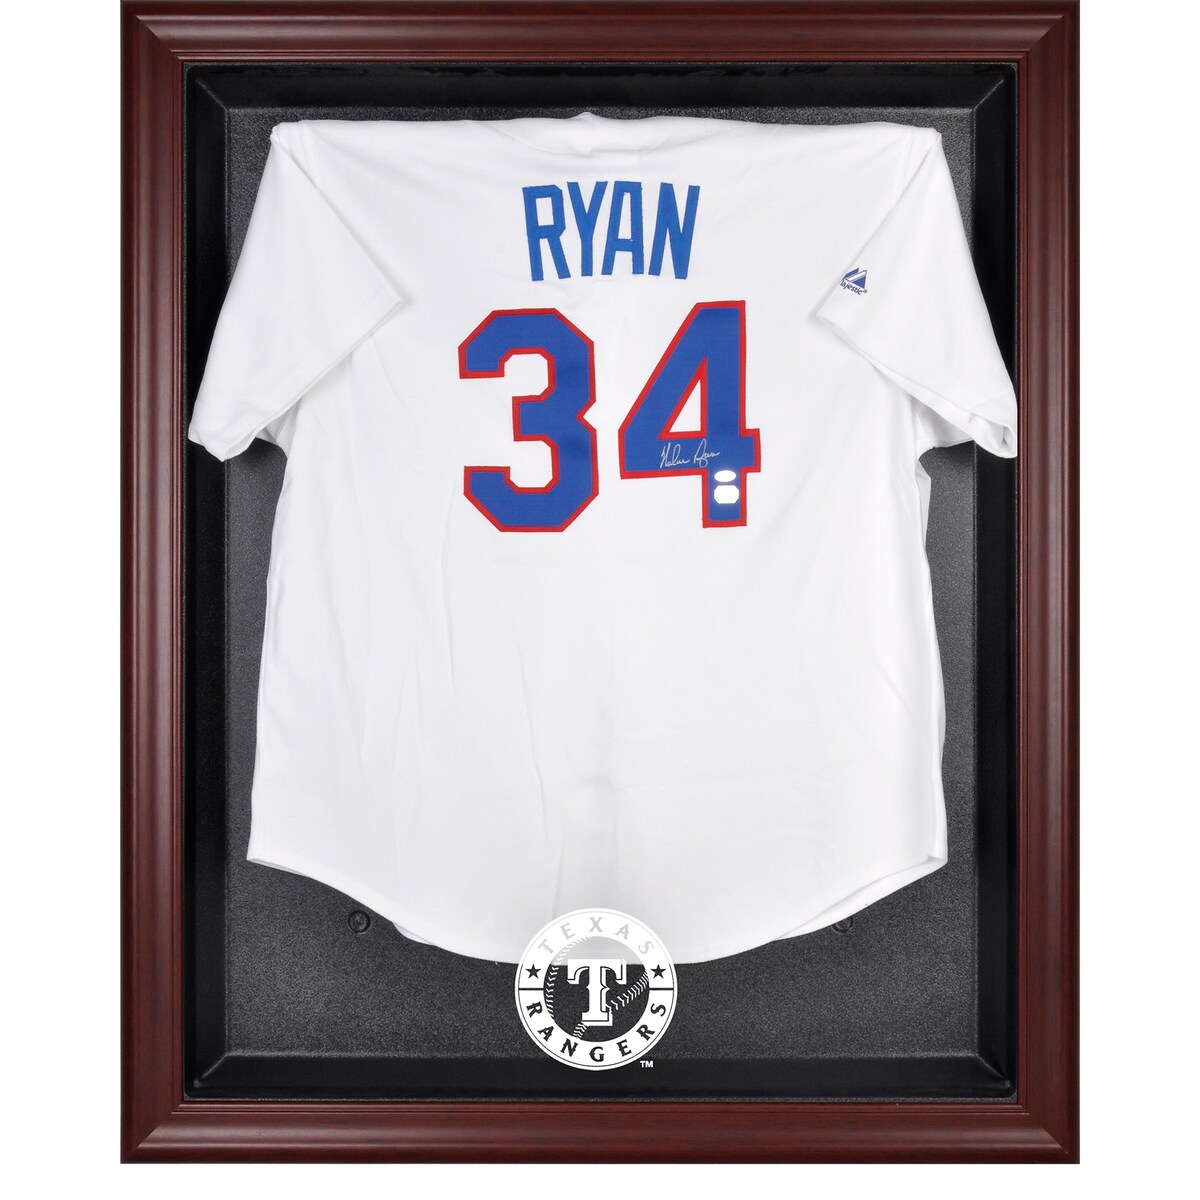 The Texas Rangers mahogany finished framed logo jersey display case opens on hinges and is easily wall-mounted. It comes with a 24" clear acrylic rod to display a collectible jersey. This case is constructed with a durable, high-strength injection mold backing, encased by a beautiful wood frame with a team logo on the front. Officially licensed by Major League Baseball. The inner dimensions of the case are 38" x 29 1/2"x 3" with the outer measurements of 42" x 34 1/2" x 3 1/2". Memorabilia sold separately.Engraved team graphicsMade in the U.S.A.Easily wall mountedOfficially licensedHas a LogoWood frameCollectible jersey display caseMemorabilia sold separatelyImportedIncludes acrylic rod to hold jerseyBrand: Fanatics AuthenticHinges to open easily